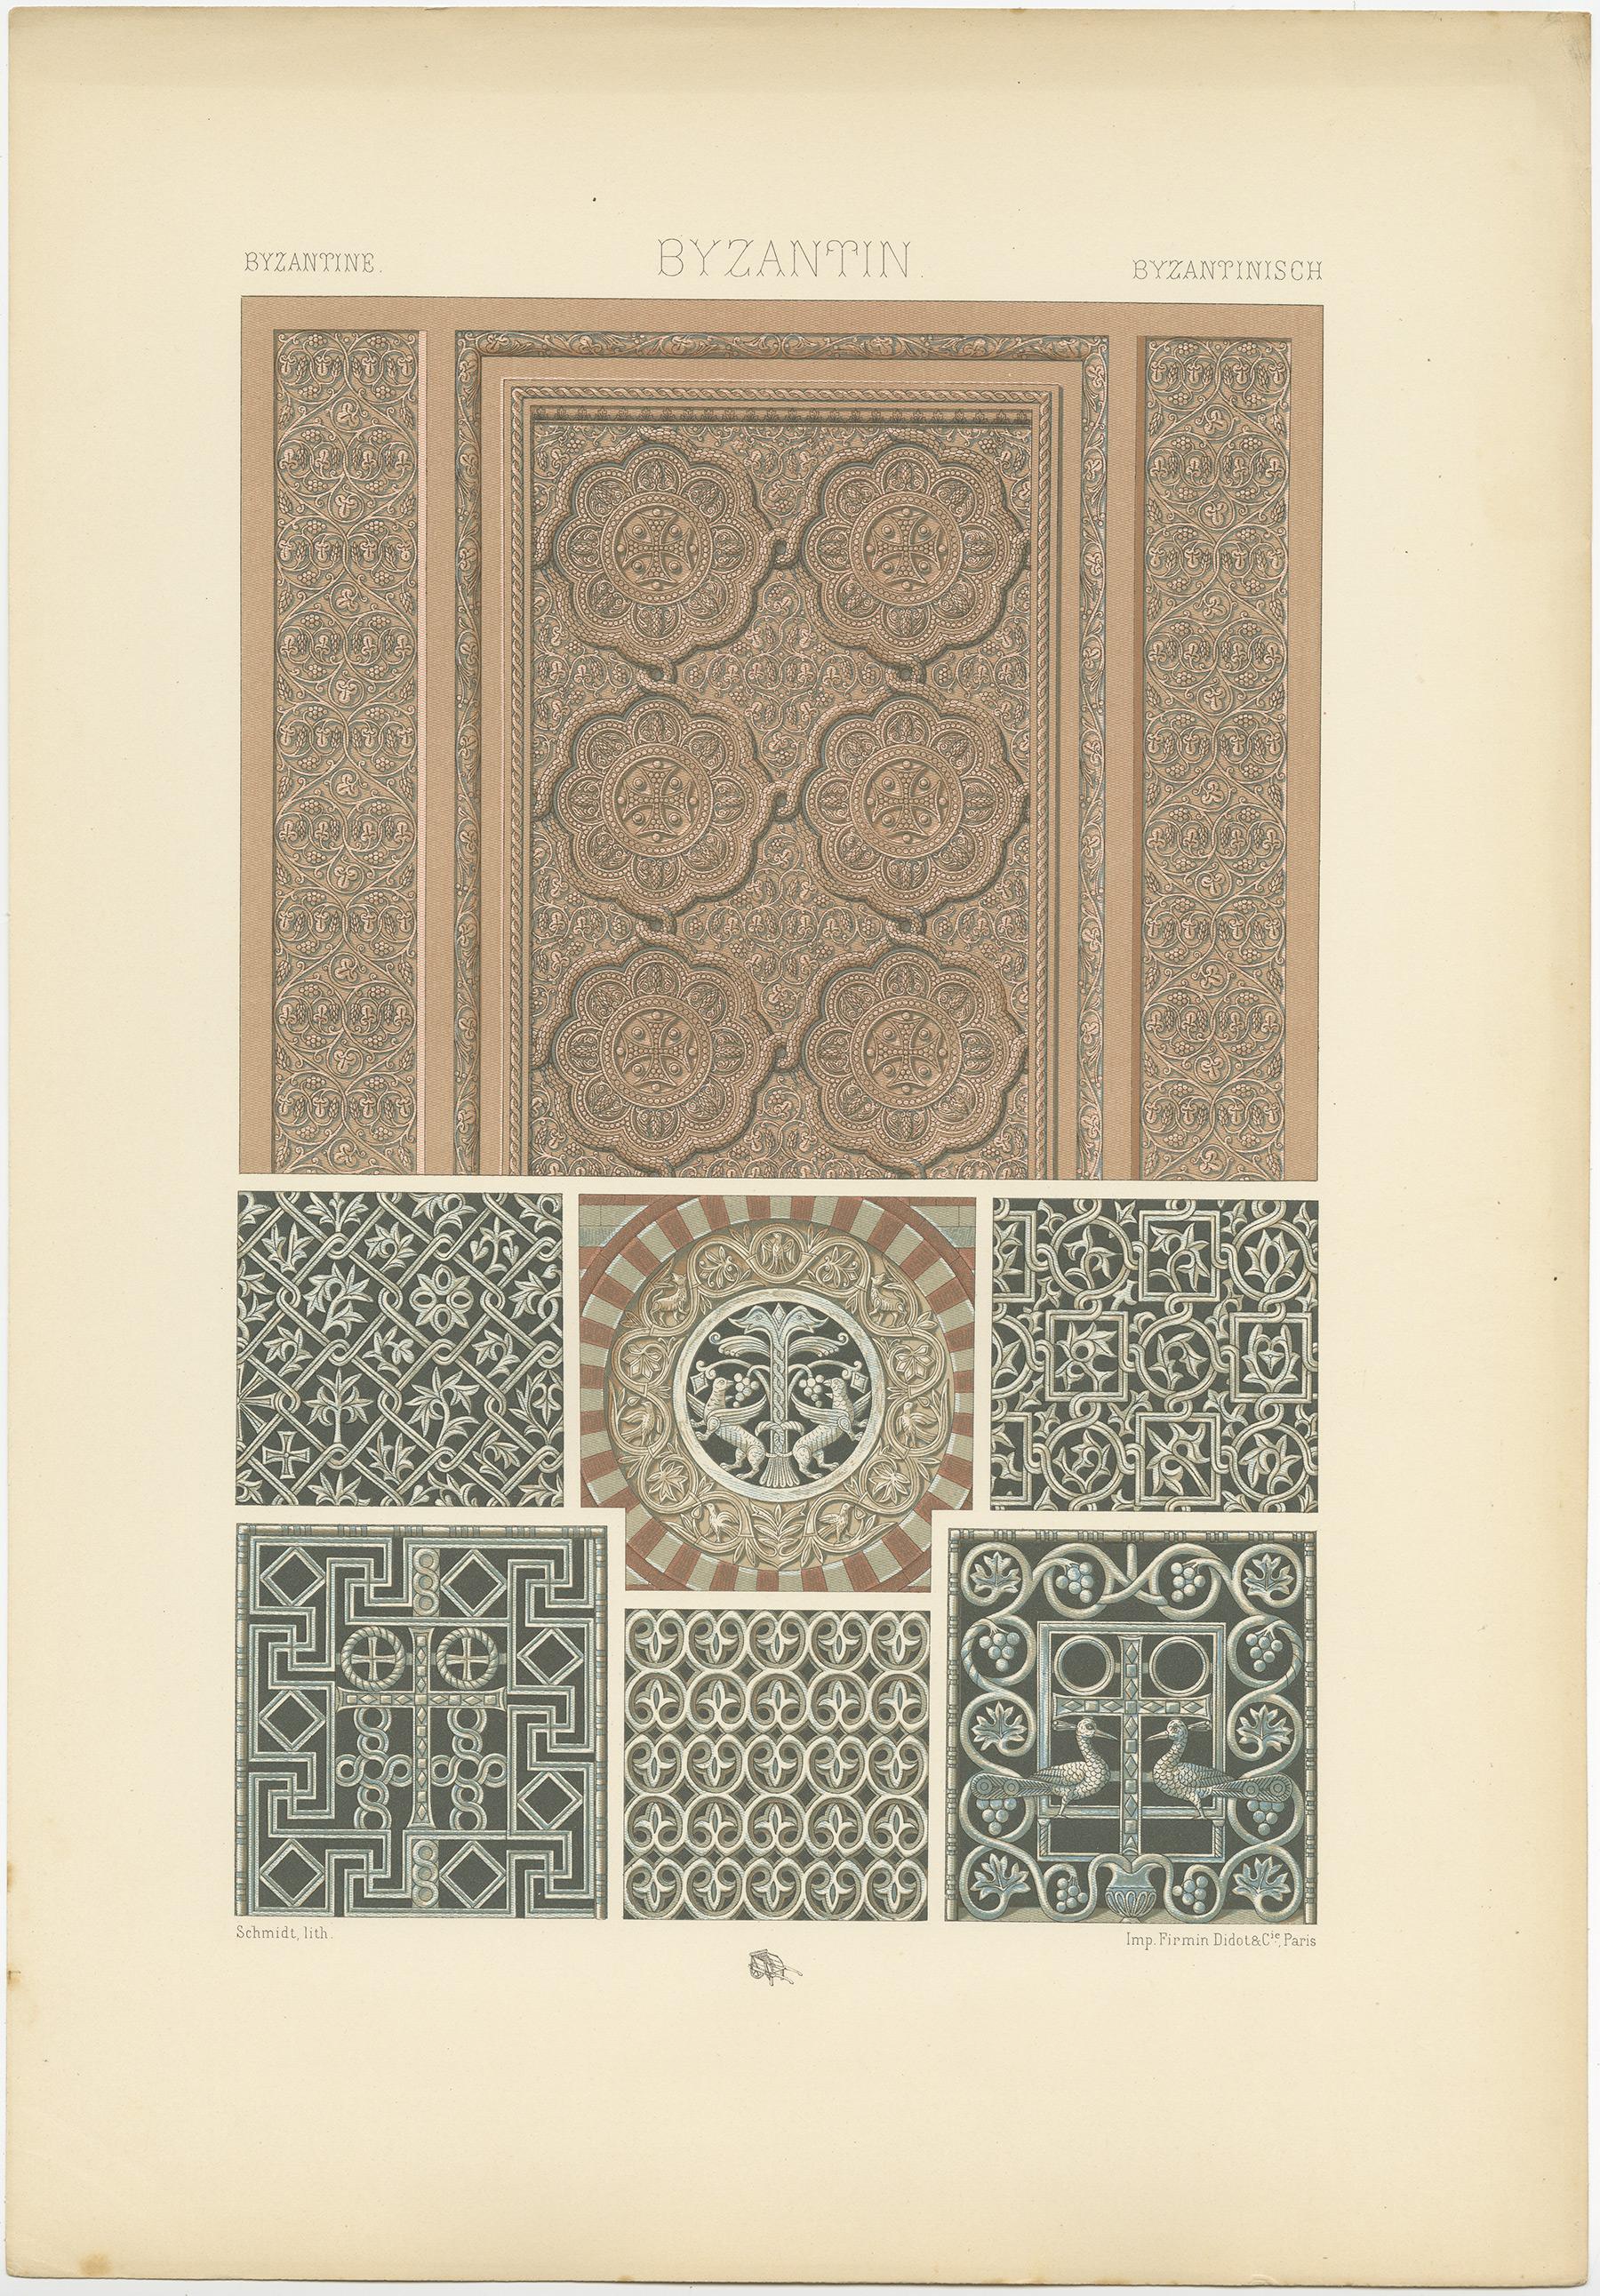 19th Century Pl. 40 Antique Print of Byzantine Architectural Motifs  by Racinet, circa 1890 For Sale